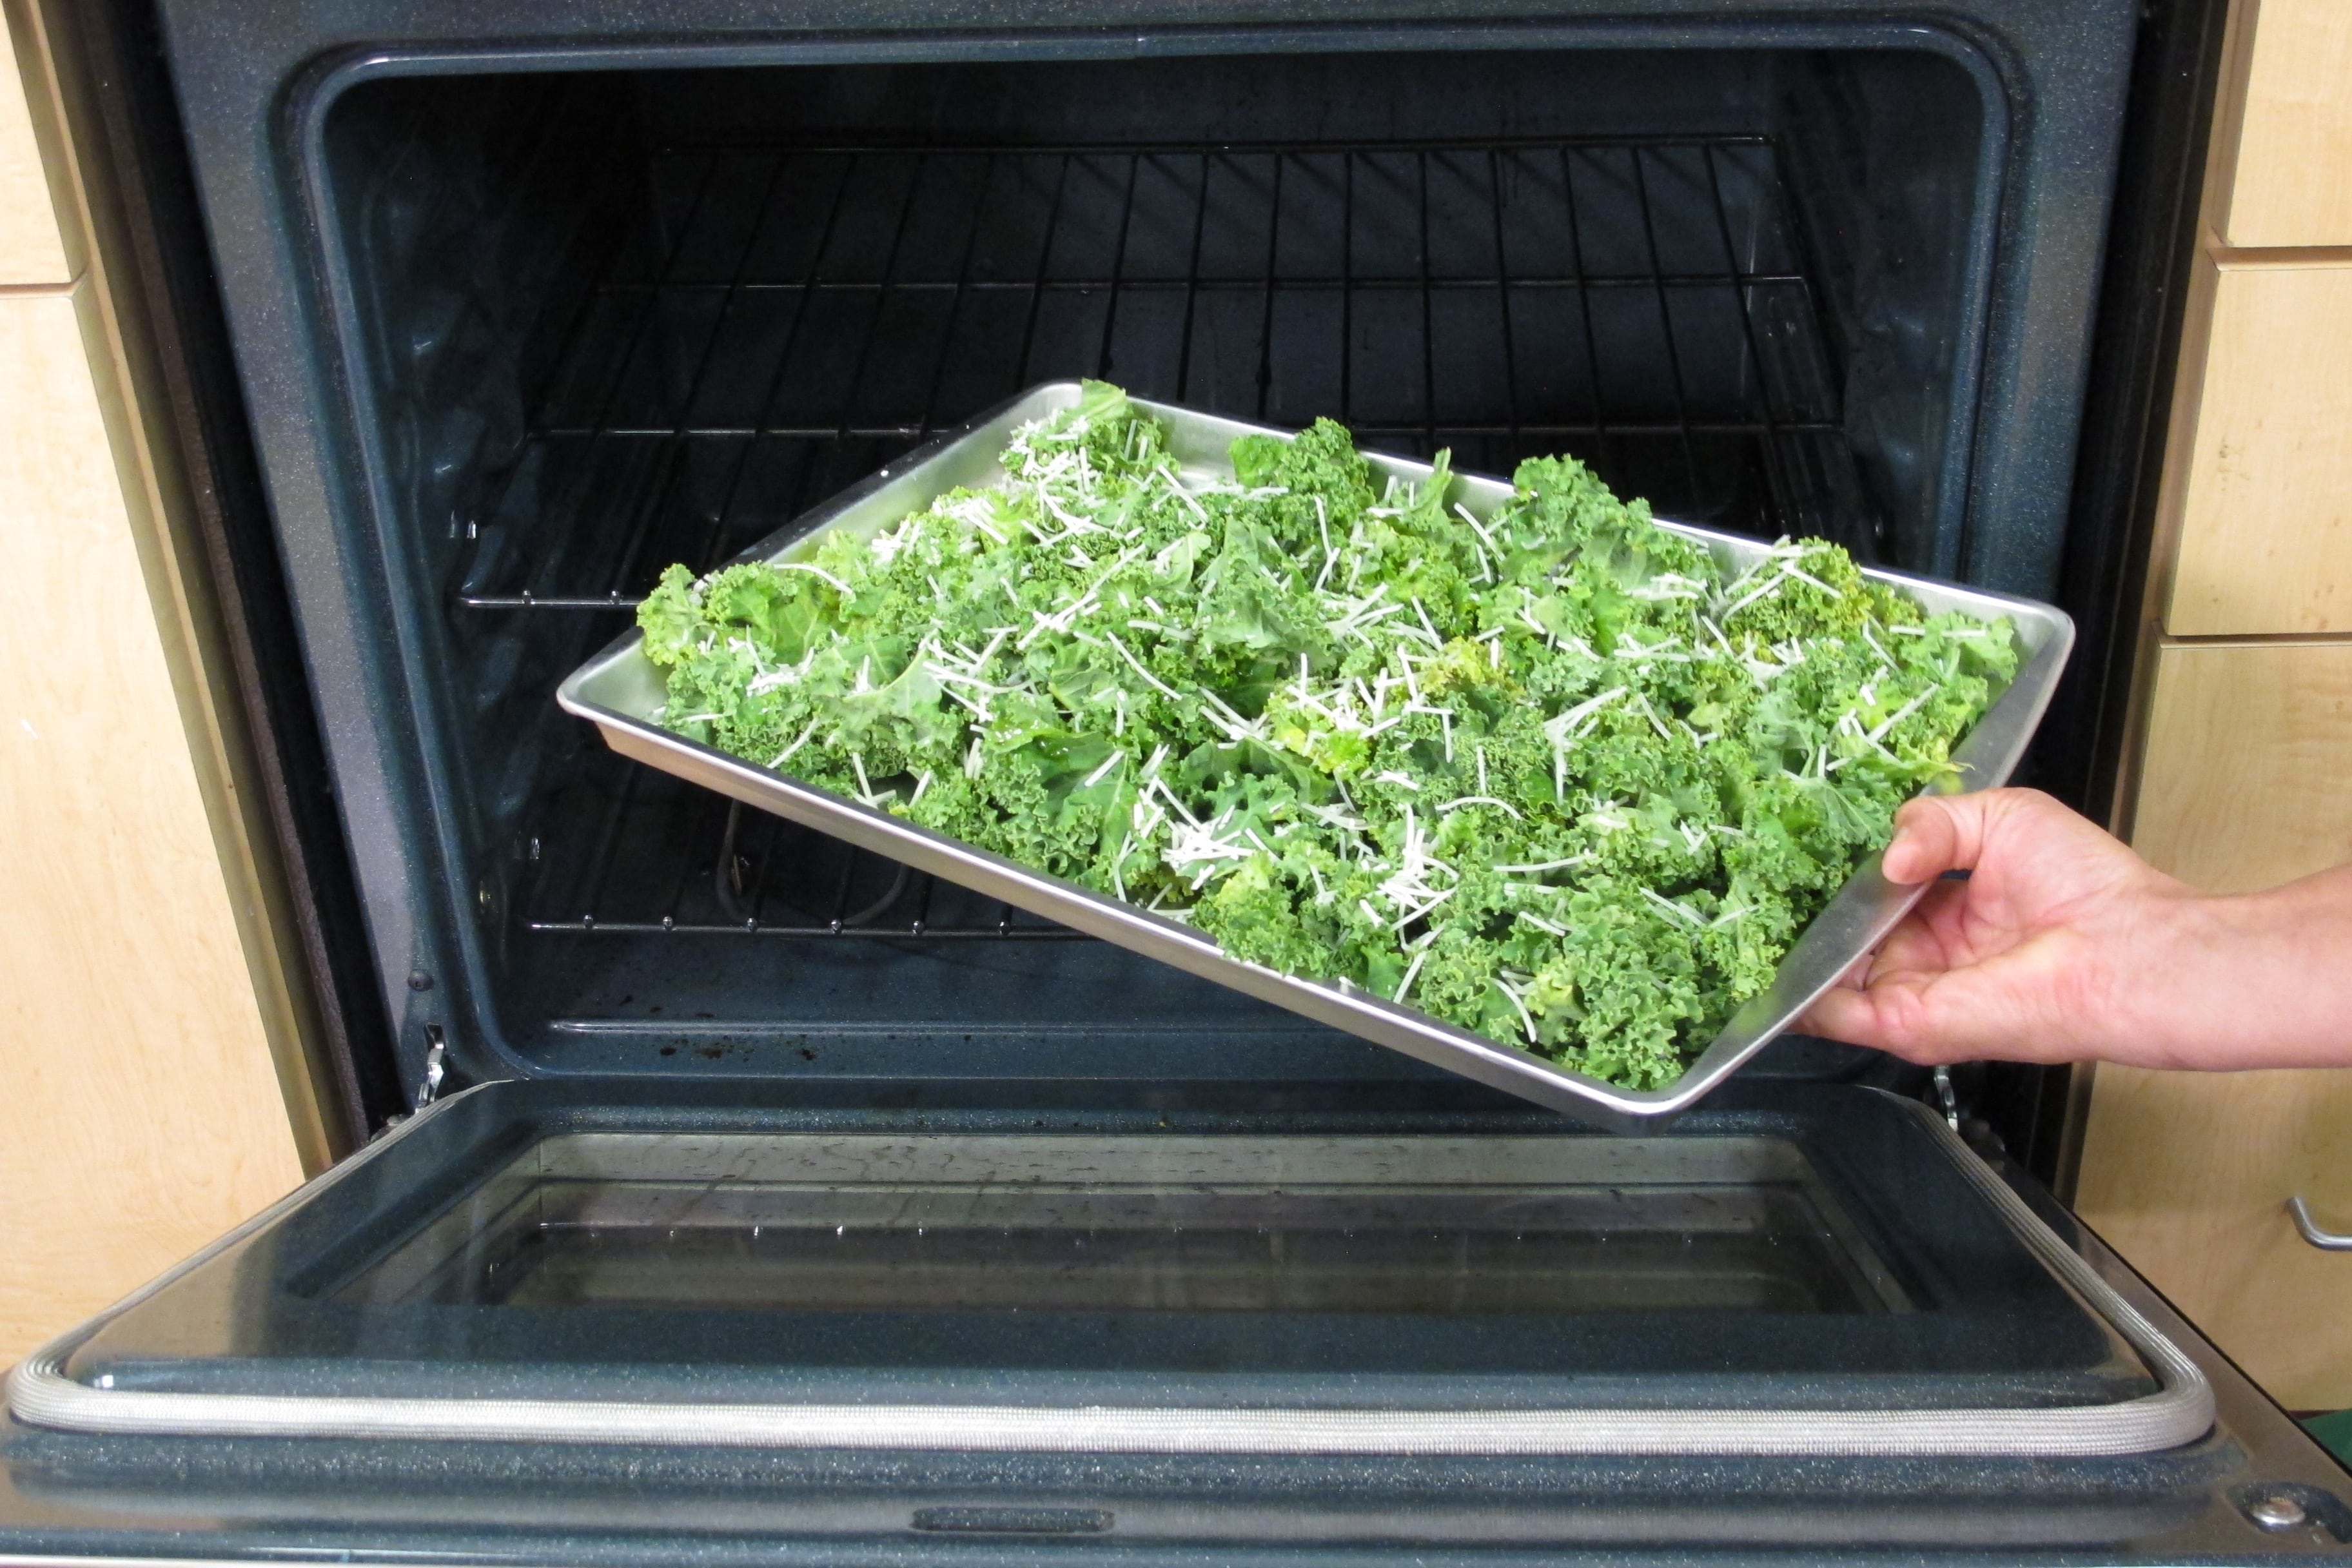 Bake at 400°F for 10–15 minutes or until kale is crisp and edges are brown but not burned.